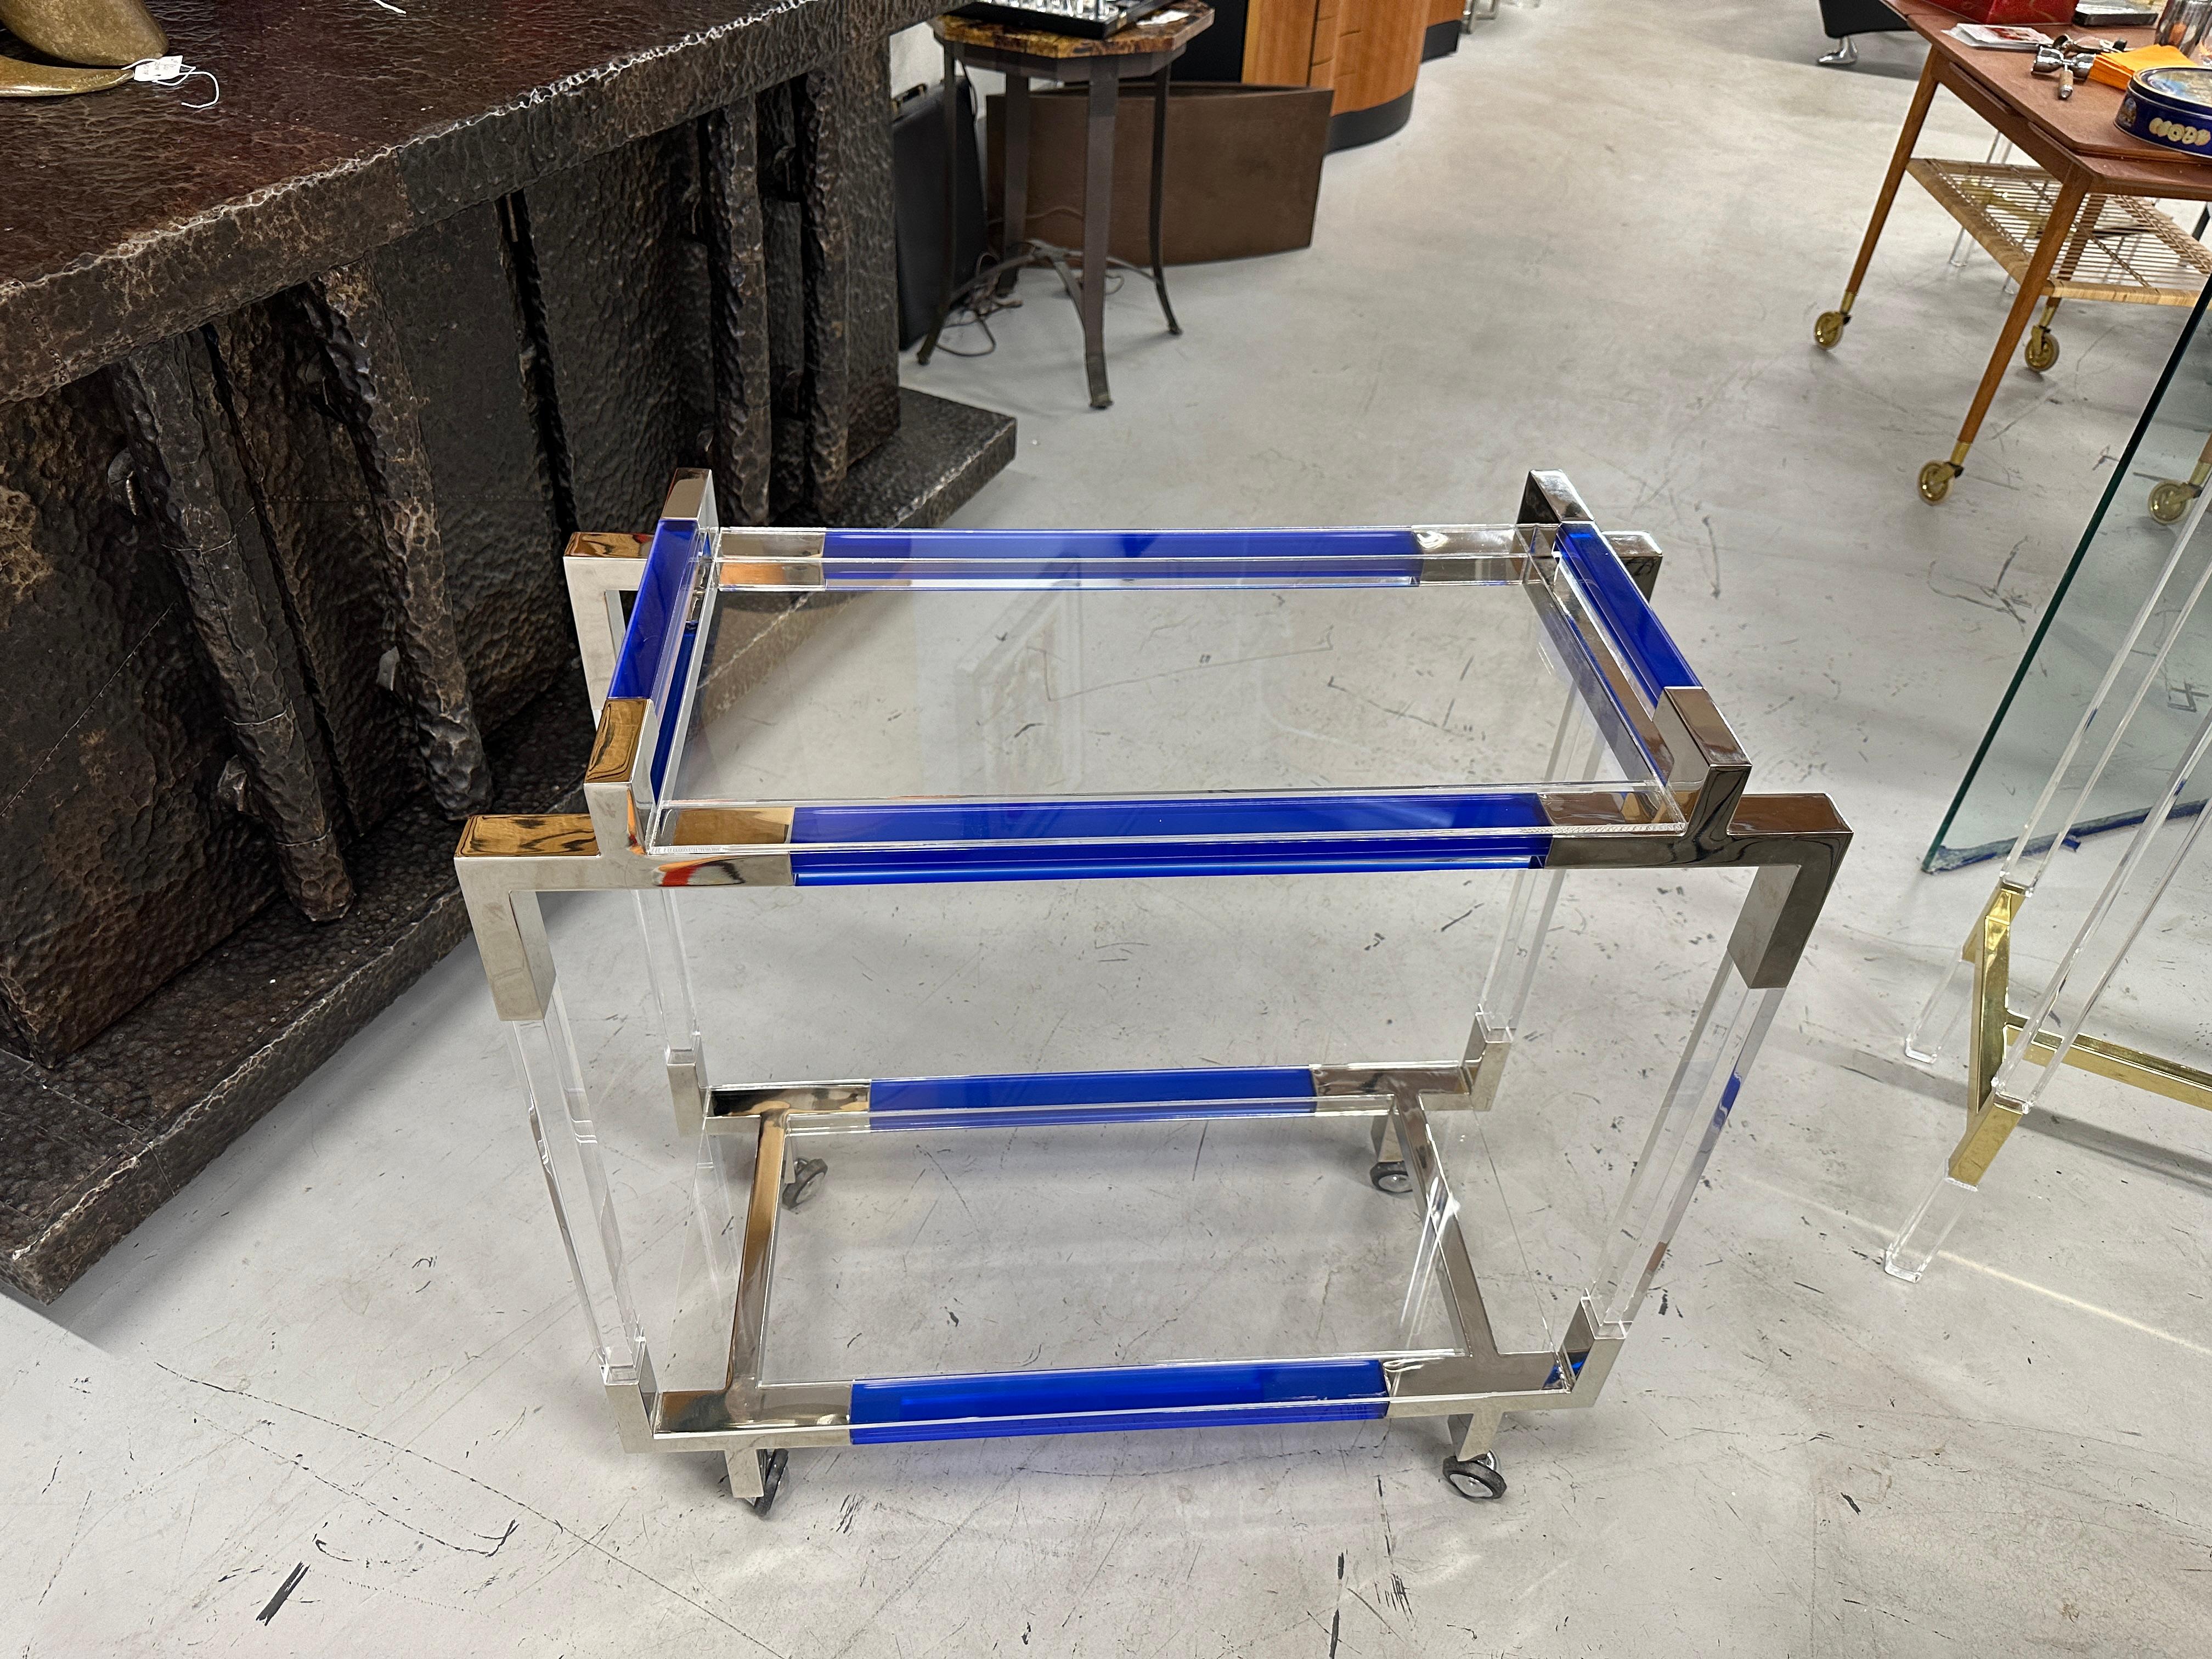 A lovely Charles Hollis Jones bar cart with Cobalt blue colored accent sides and handles. On rubber trimmed castors for easy movement. The top and bottom shelf are lucite. The trim is polished nickel.
Purchased directly from Mr. Jones.
It is